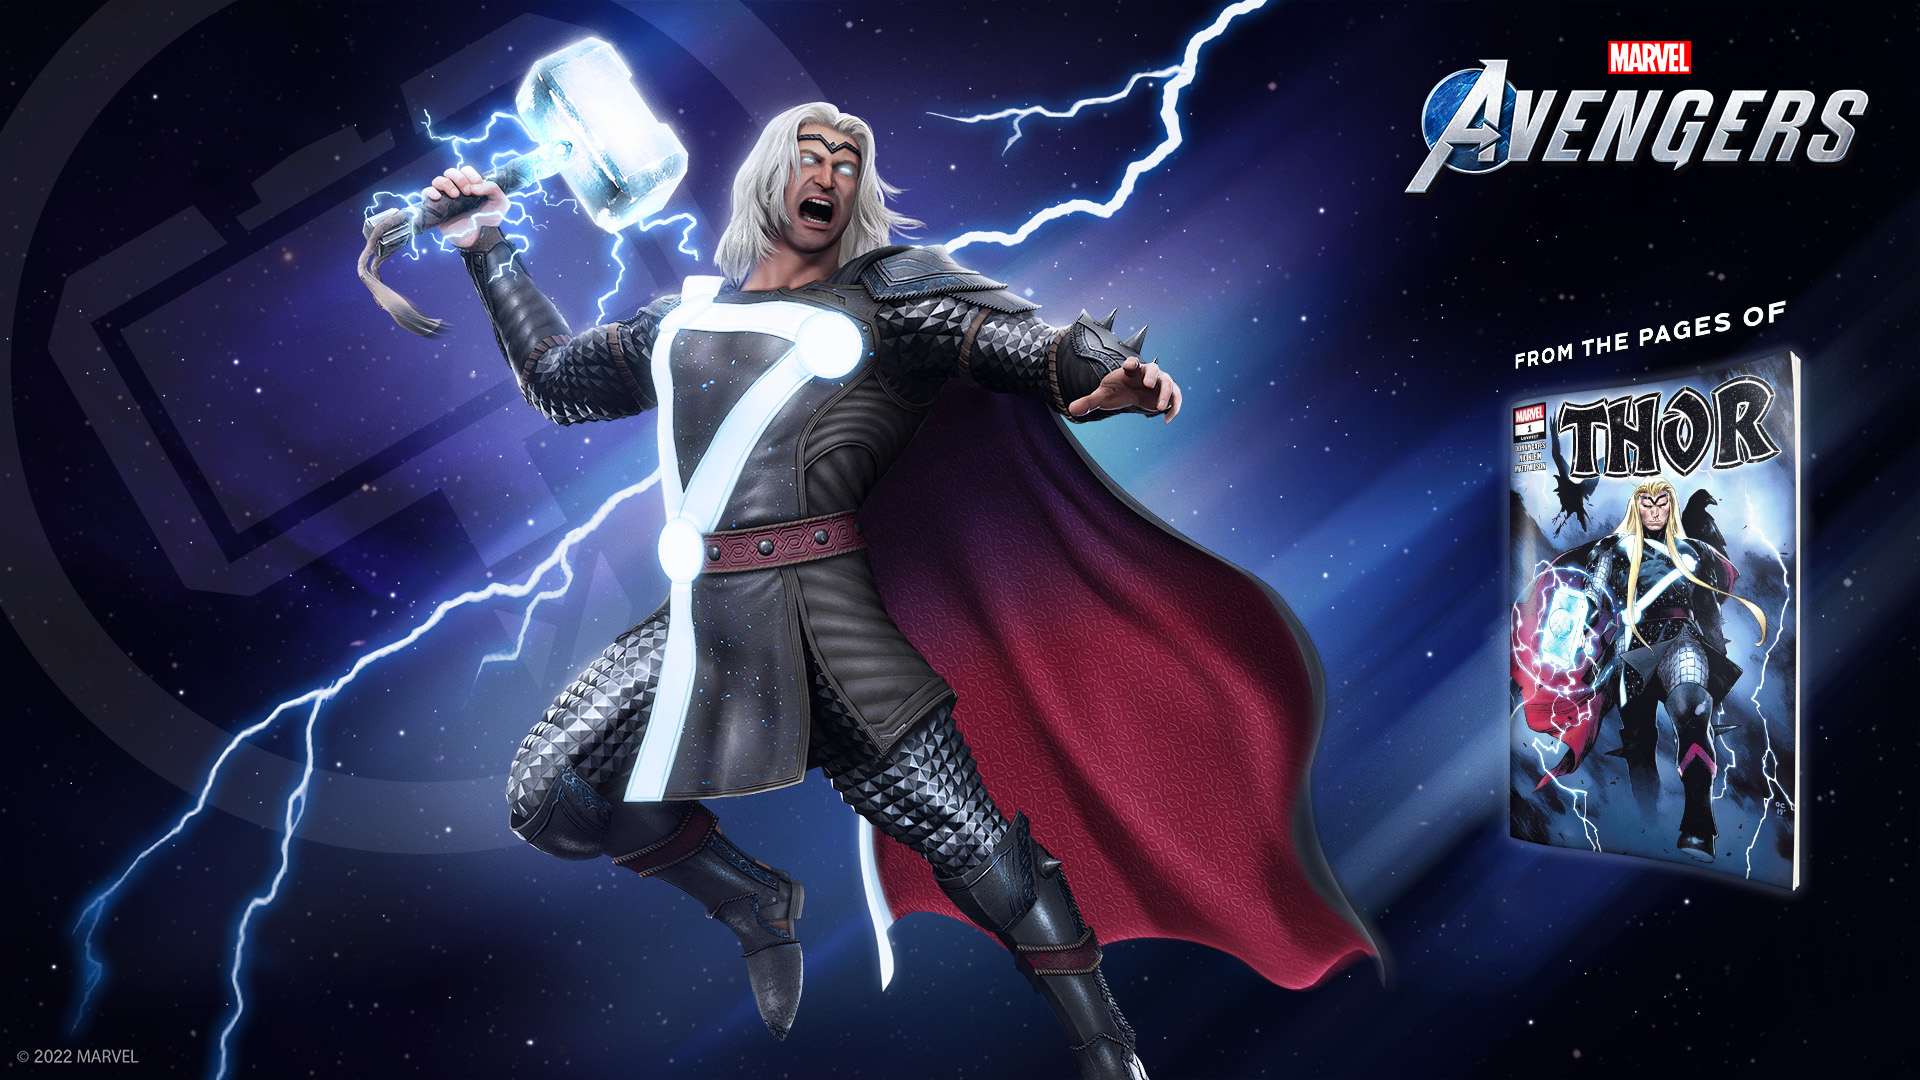 Marvel's Avengers Twitter: "The God Thunder is all that stands between the universe and the ultimate end. Thor's Cosmic Herald Outfit is inspired by his Herald of Thunder that